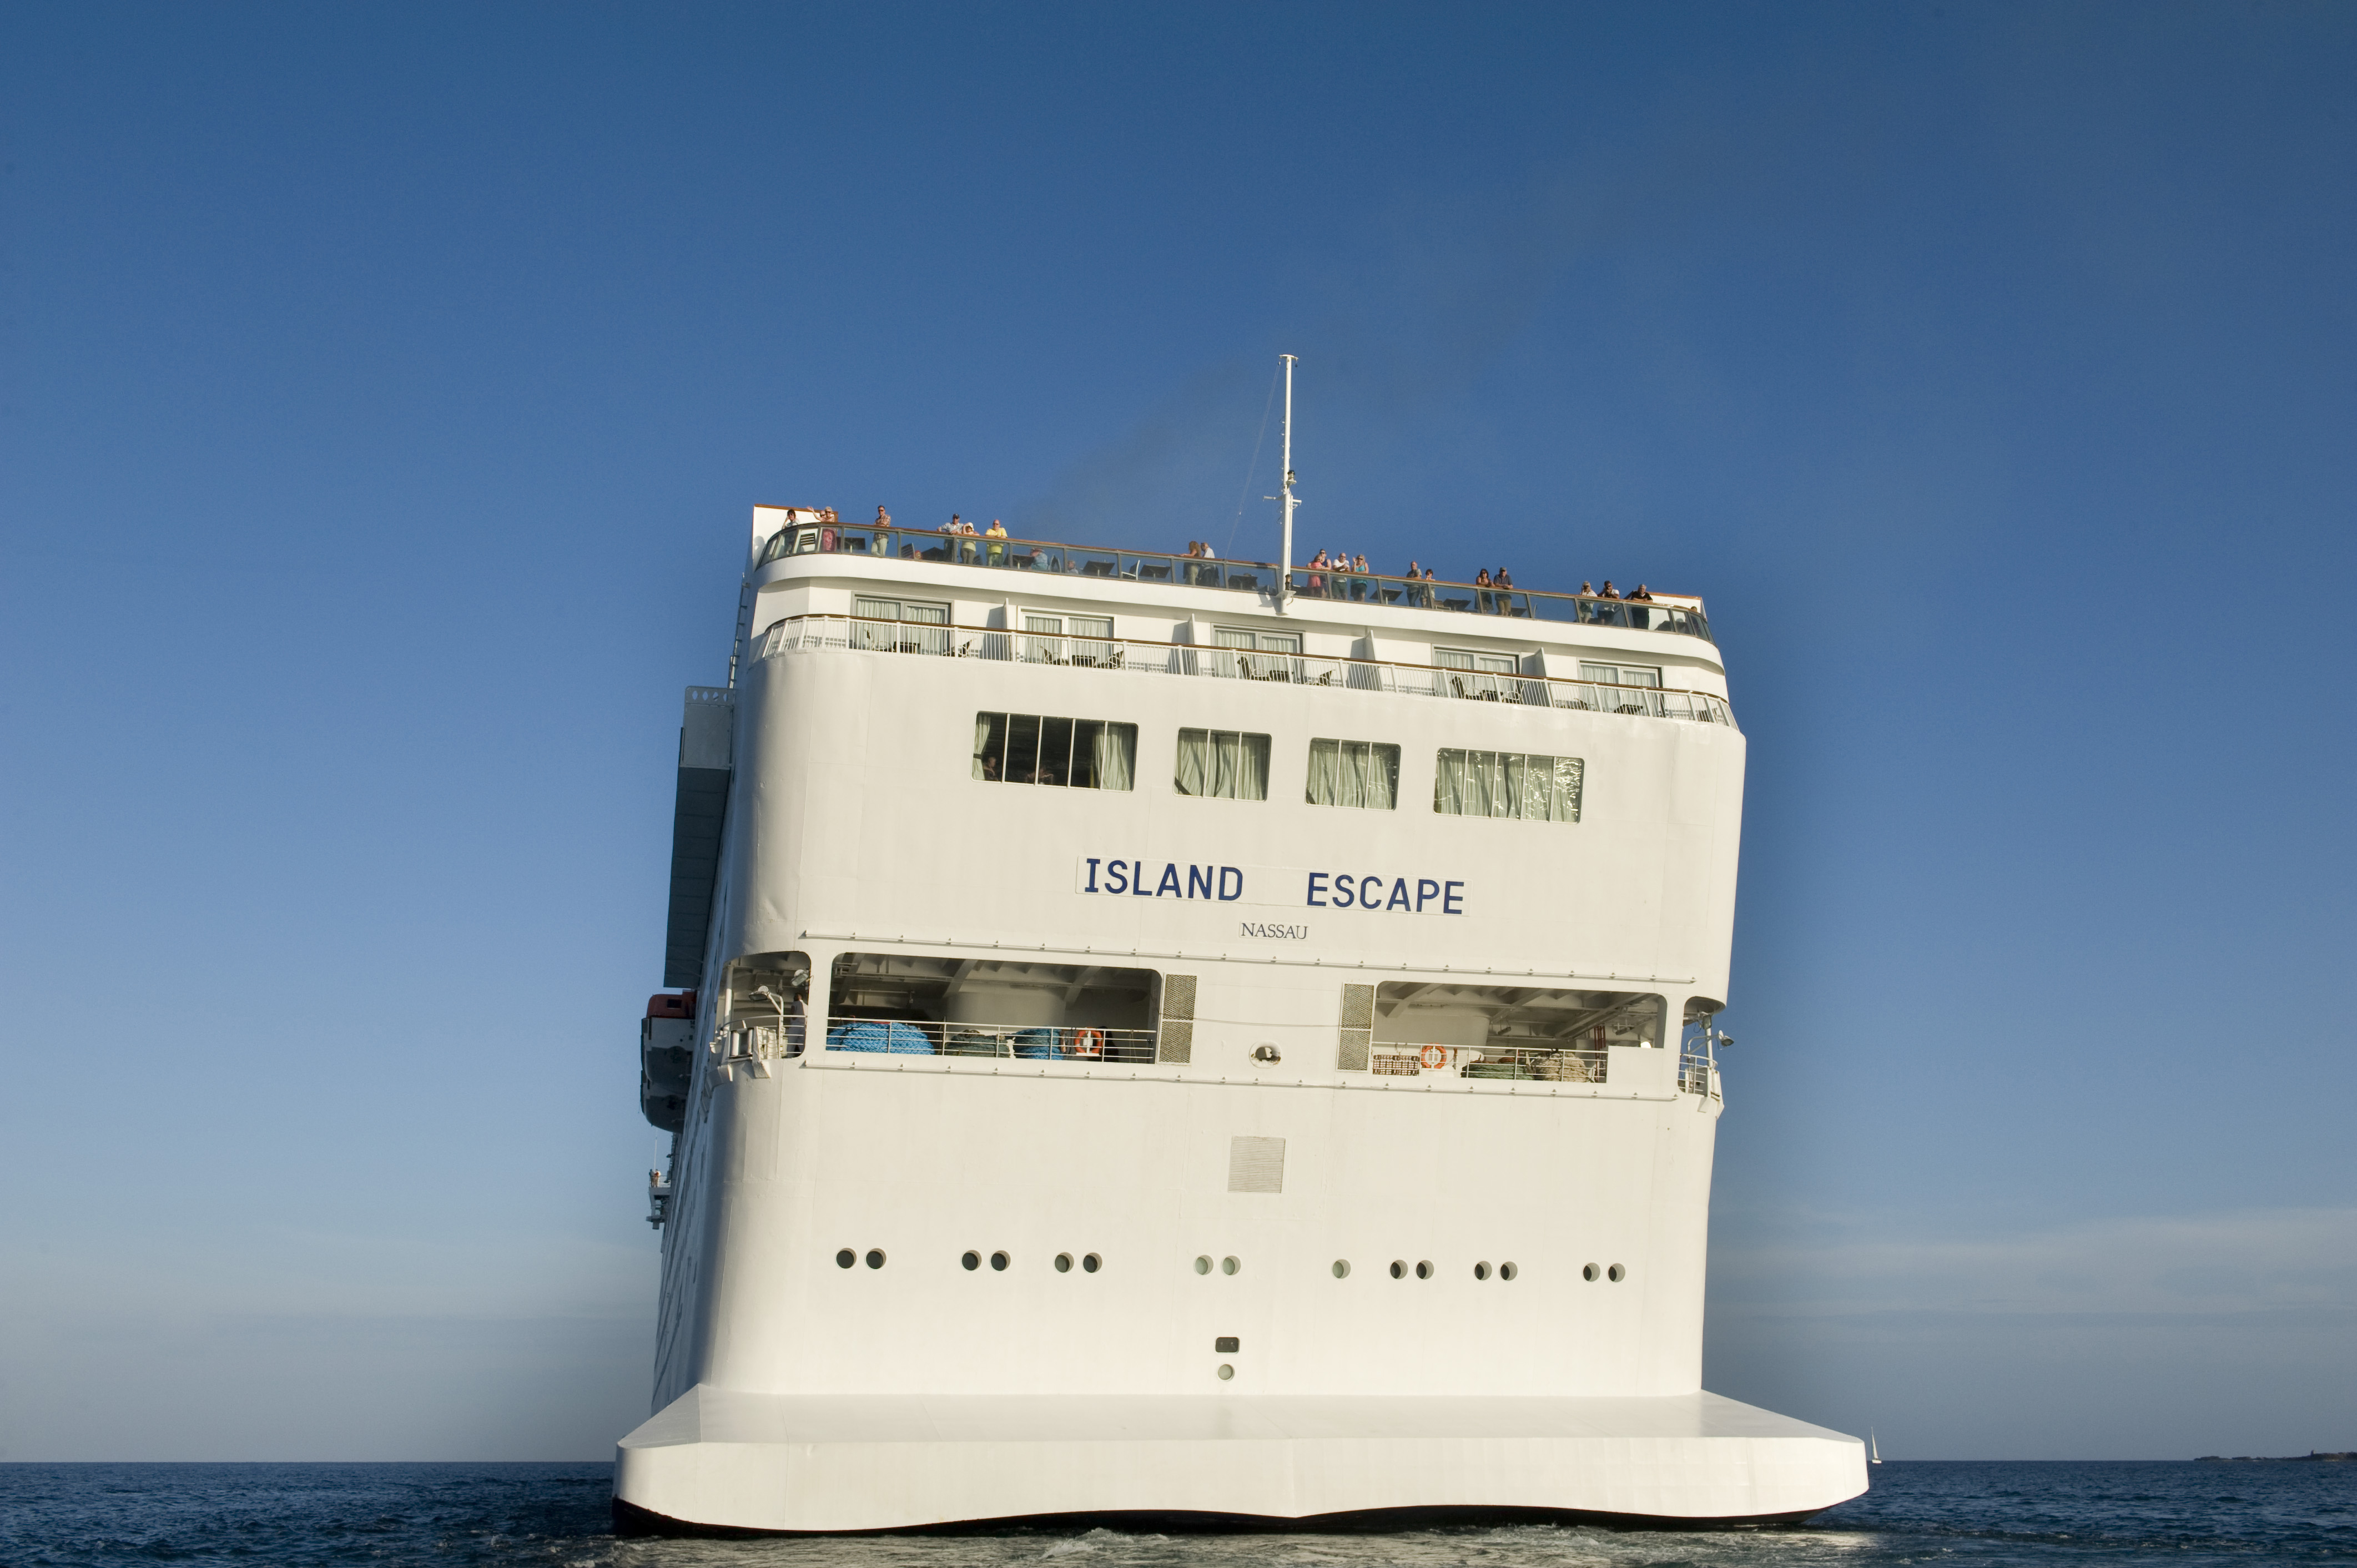 The ports of the Balearic Islands handled almost 7 million passengers in 2015